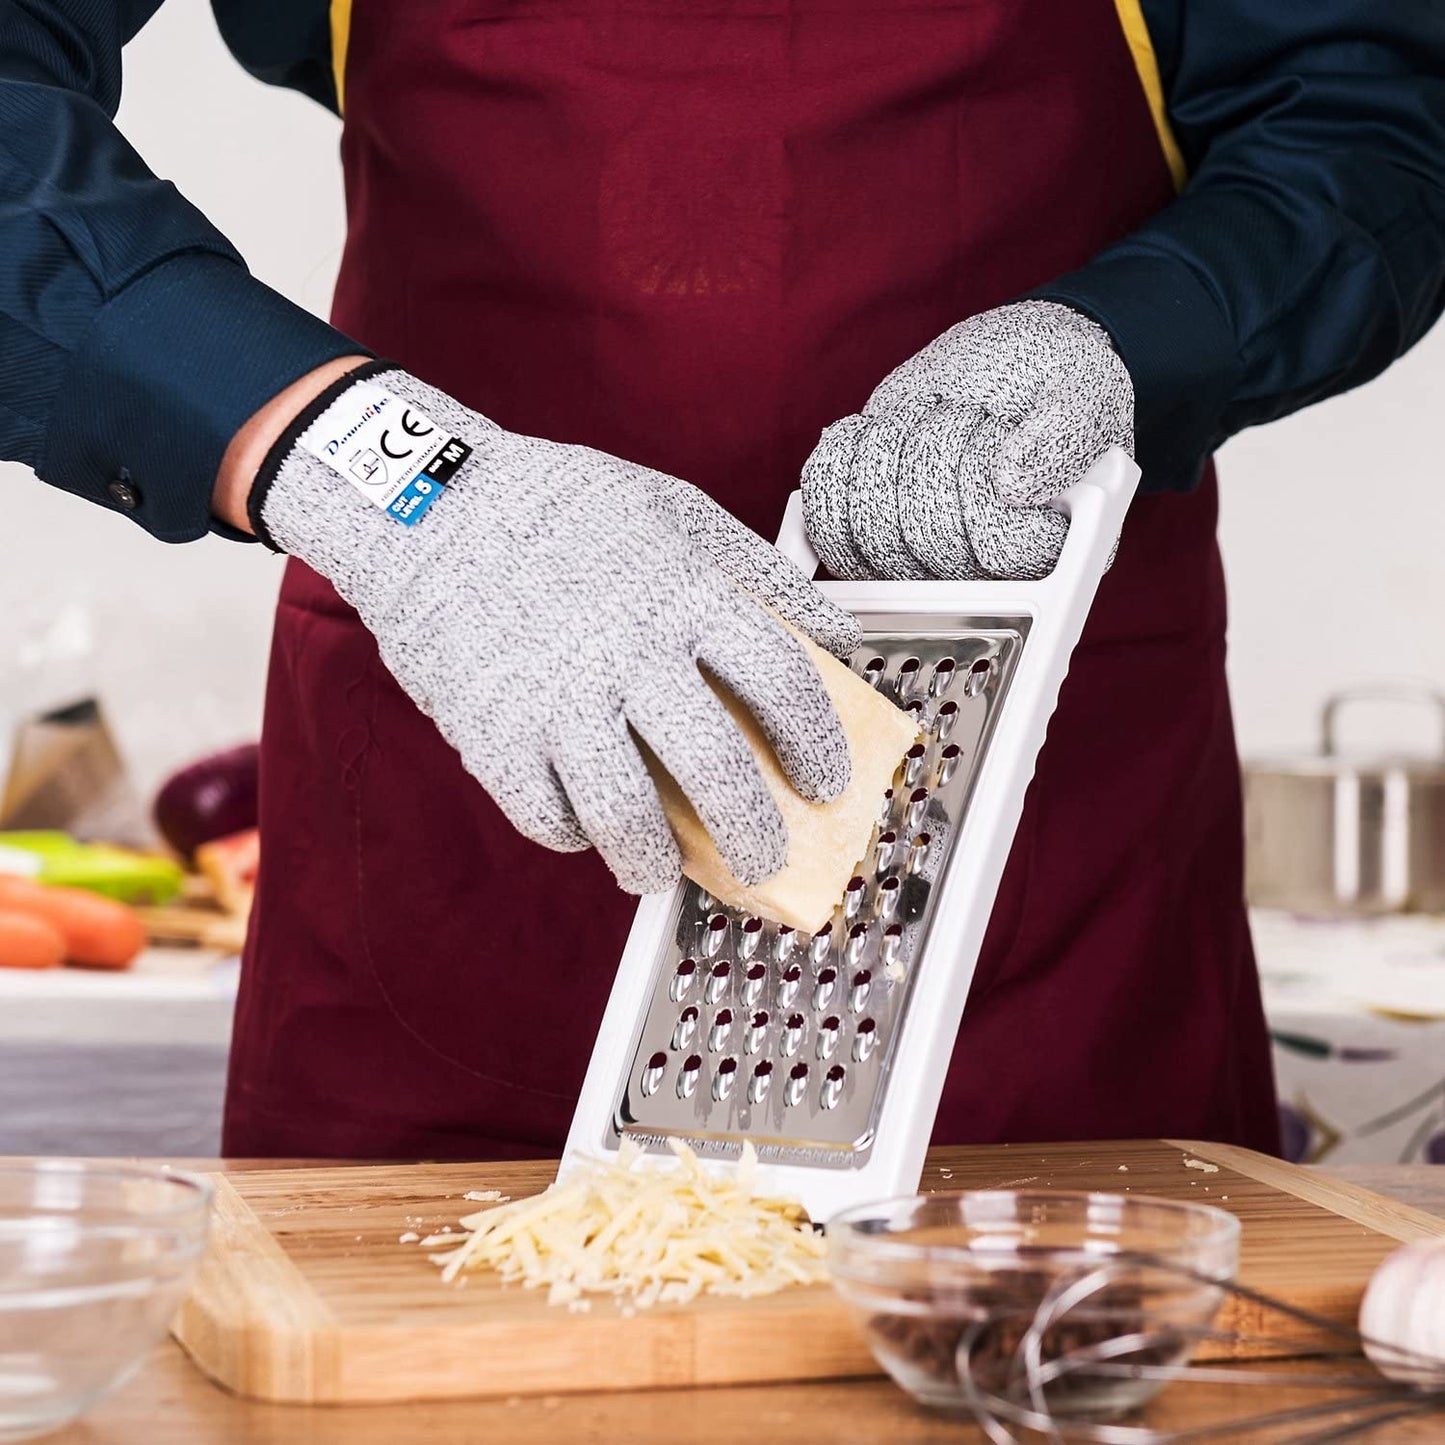 Someone grating cheese while wearing the gloves